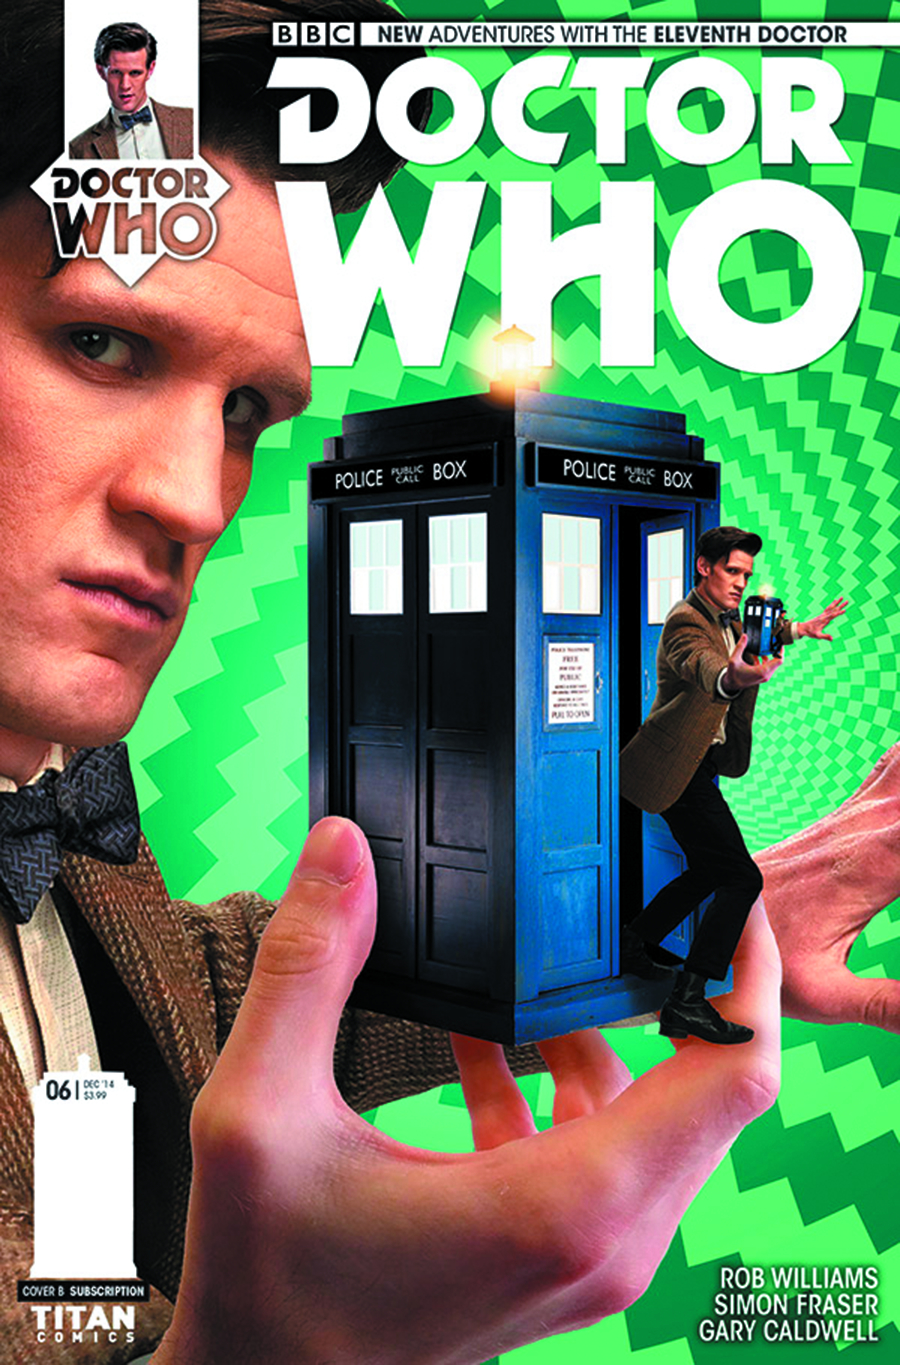 DOCTOR WHO 11TH #6 SUBSCRIPTION PHOTO